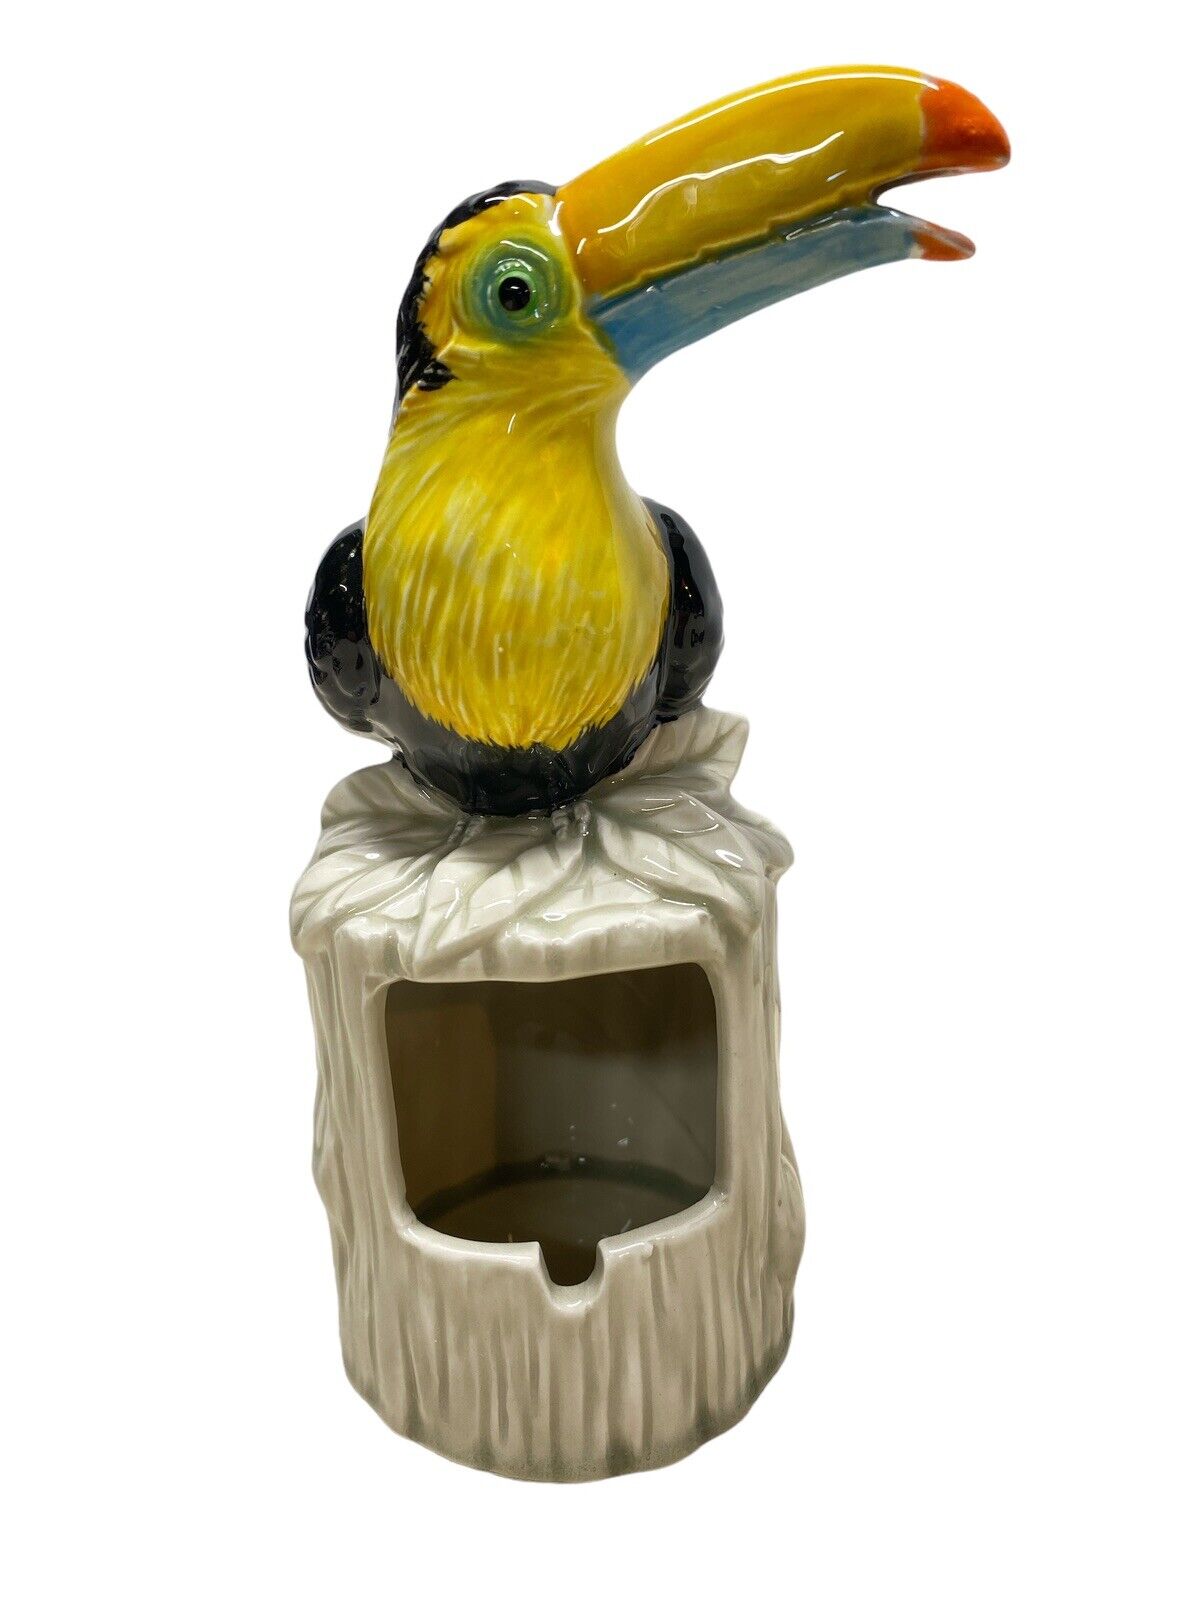 Vintage Quon Quon Japan Toucan Bird Hand Painted Ceramic Ashtray 7 3/8”